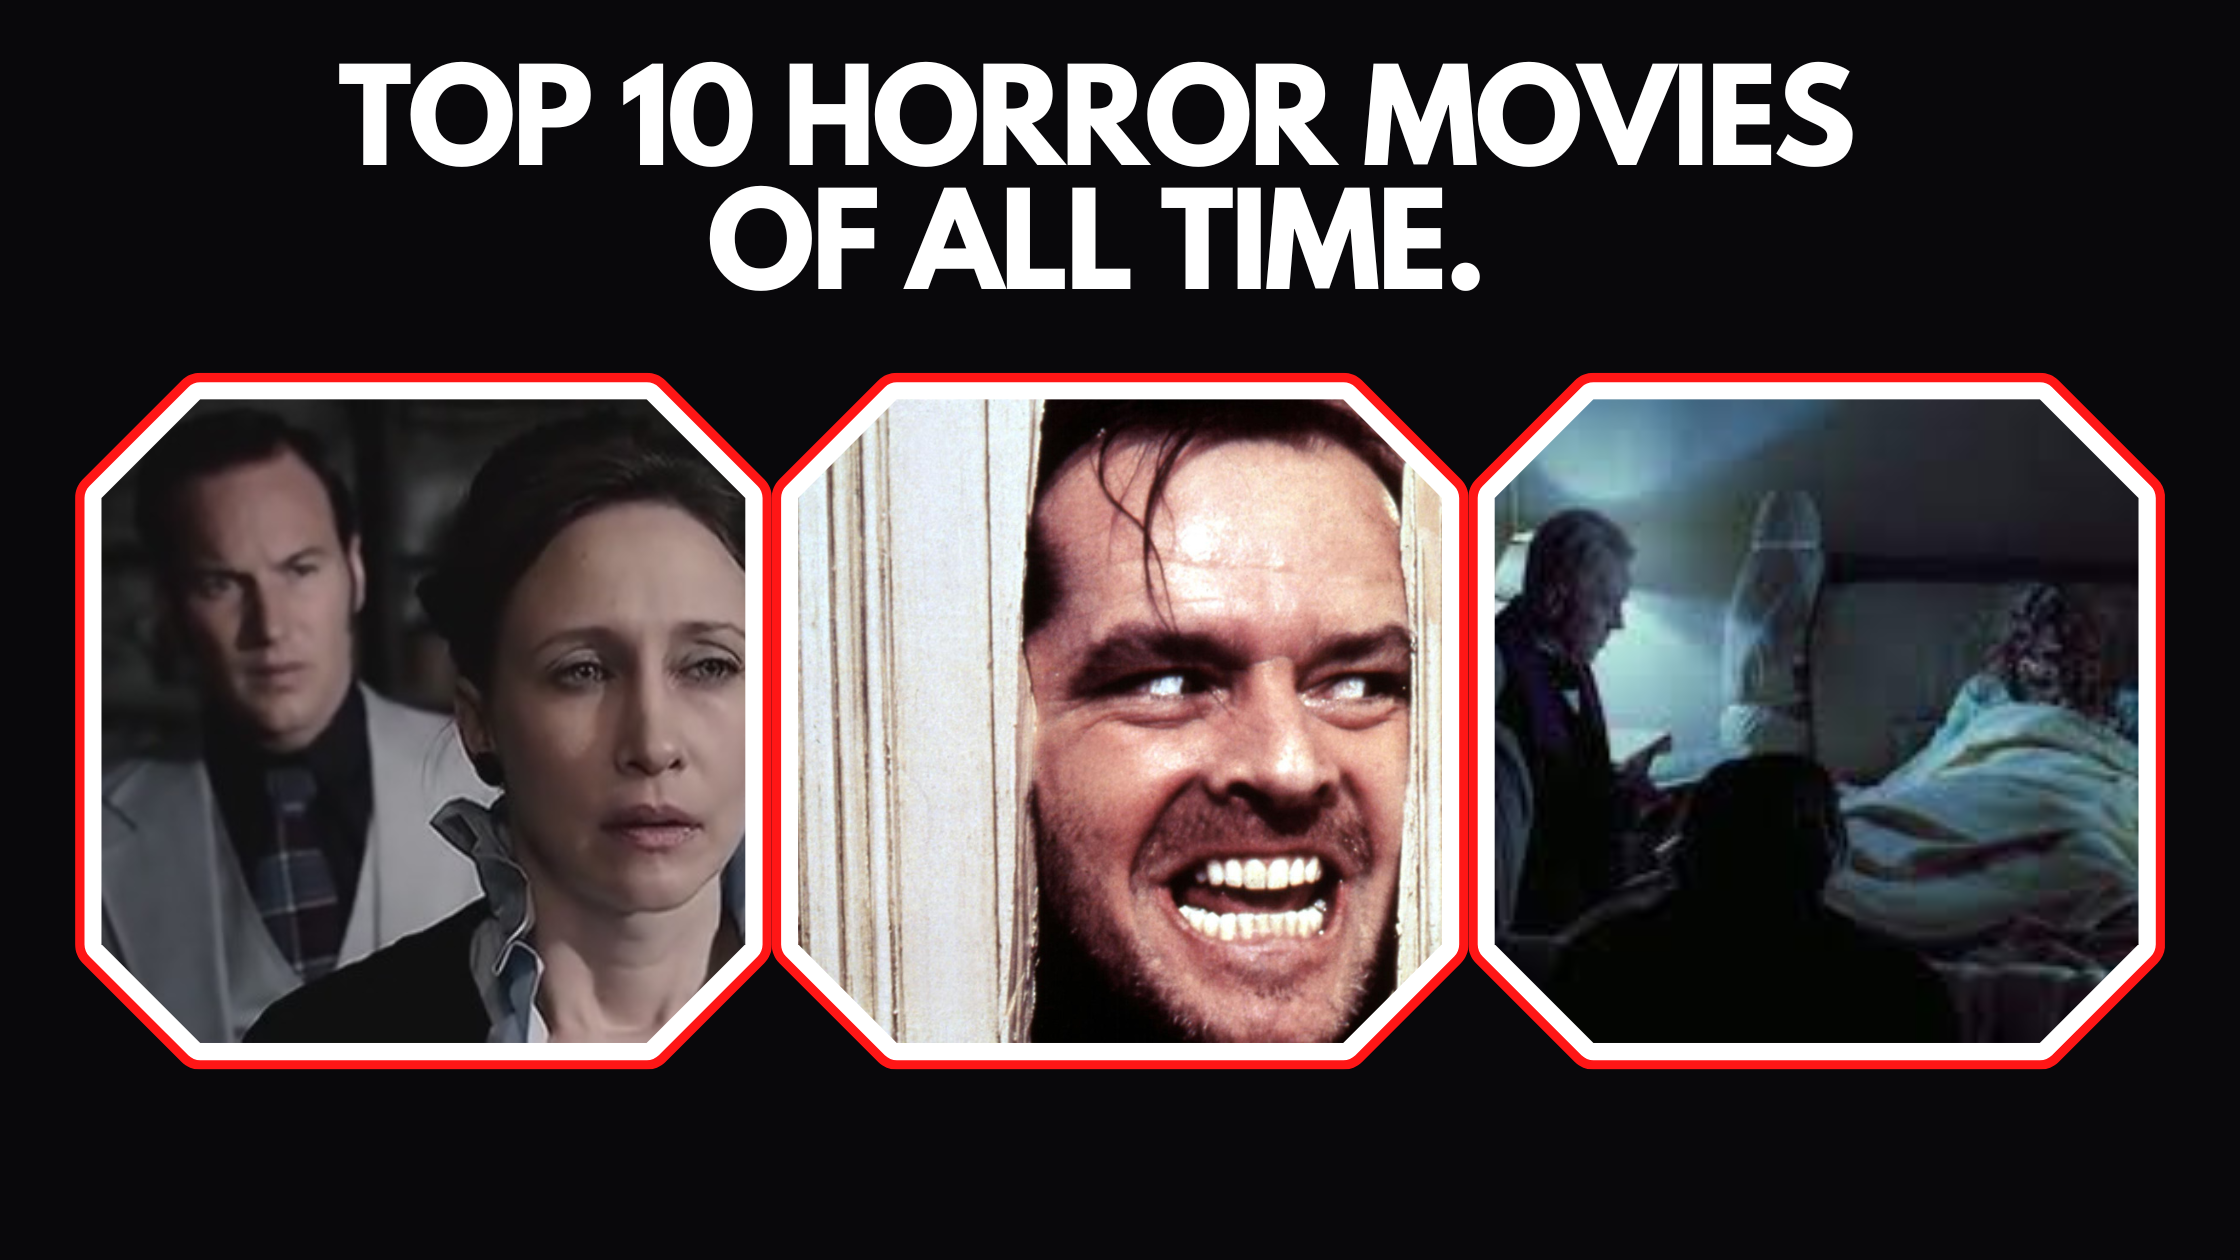 Top 10 horror movies of all time